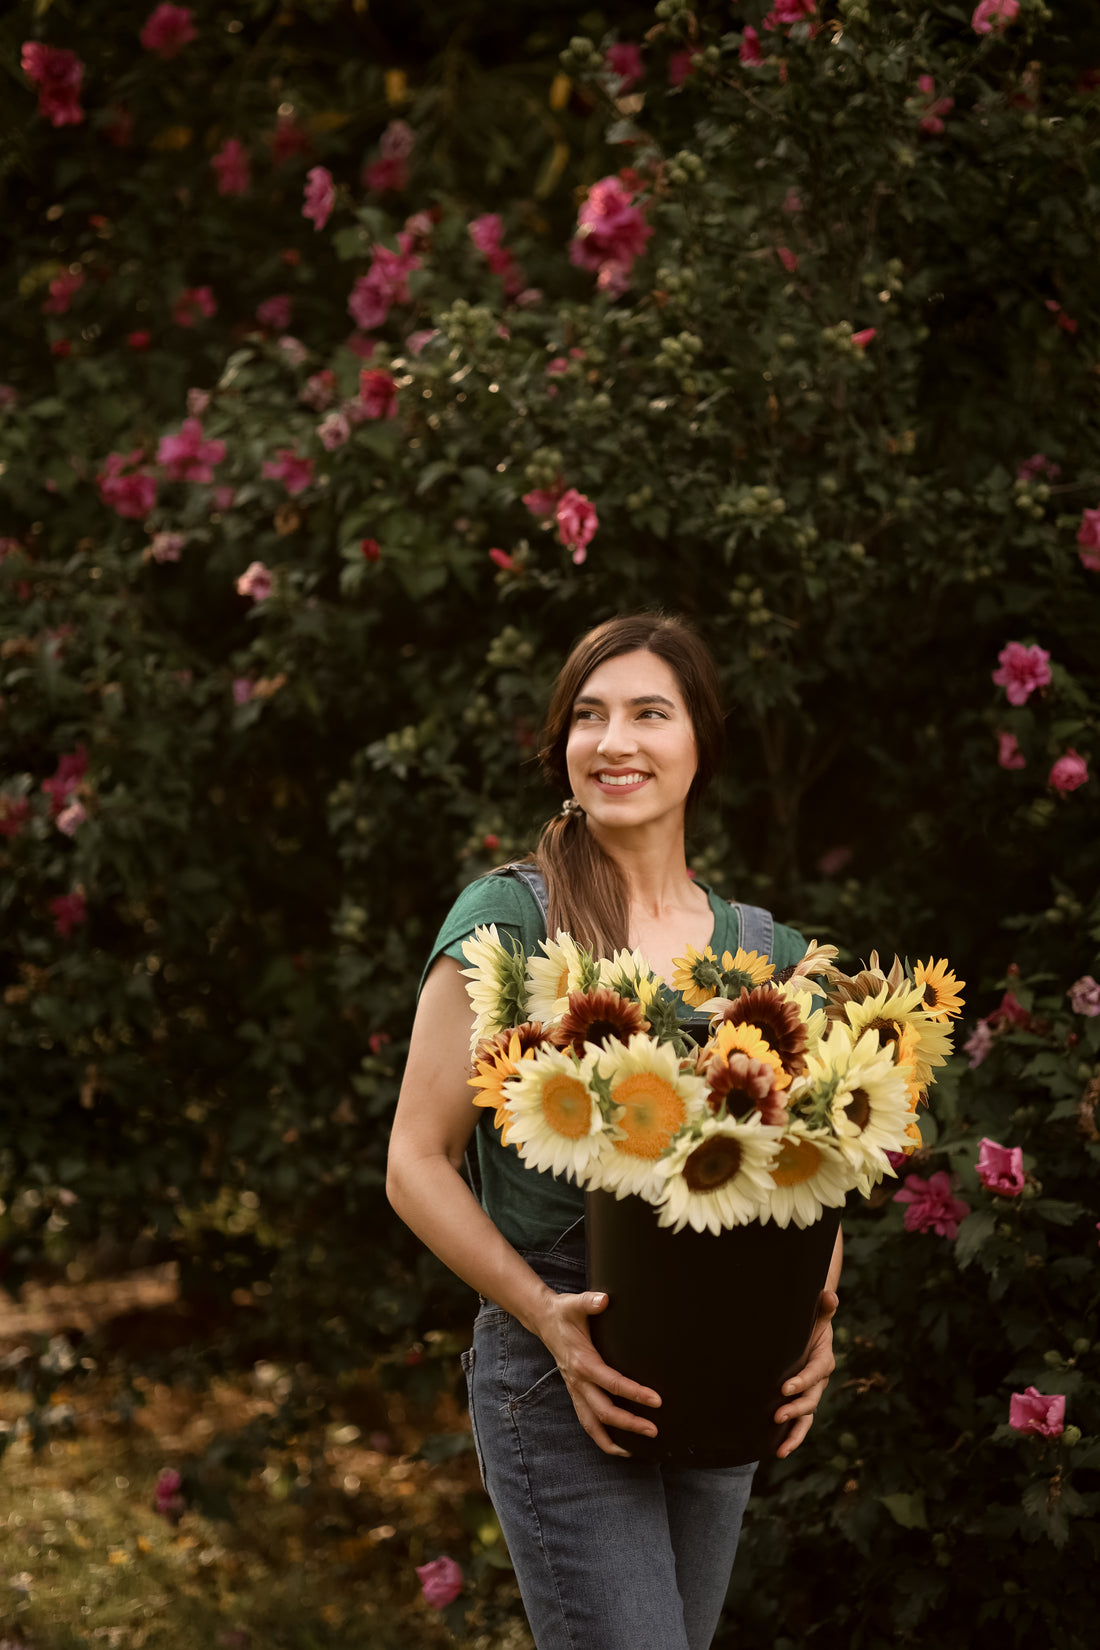 From Physician Assistant to Farmer-Florist and Entrepreneur: My Journey